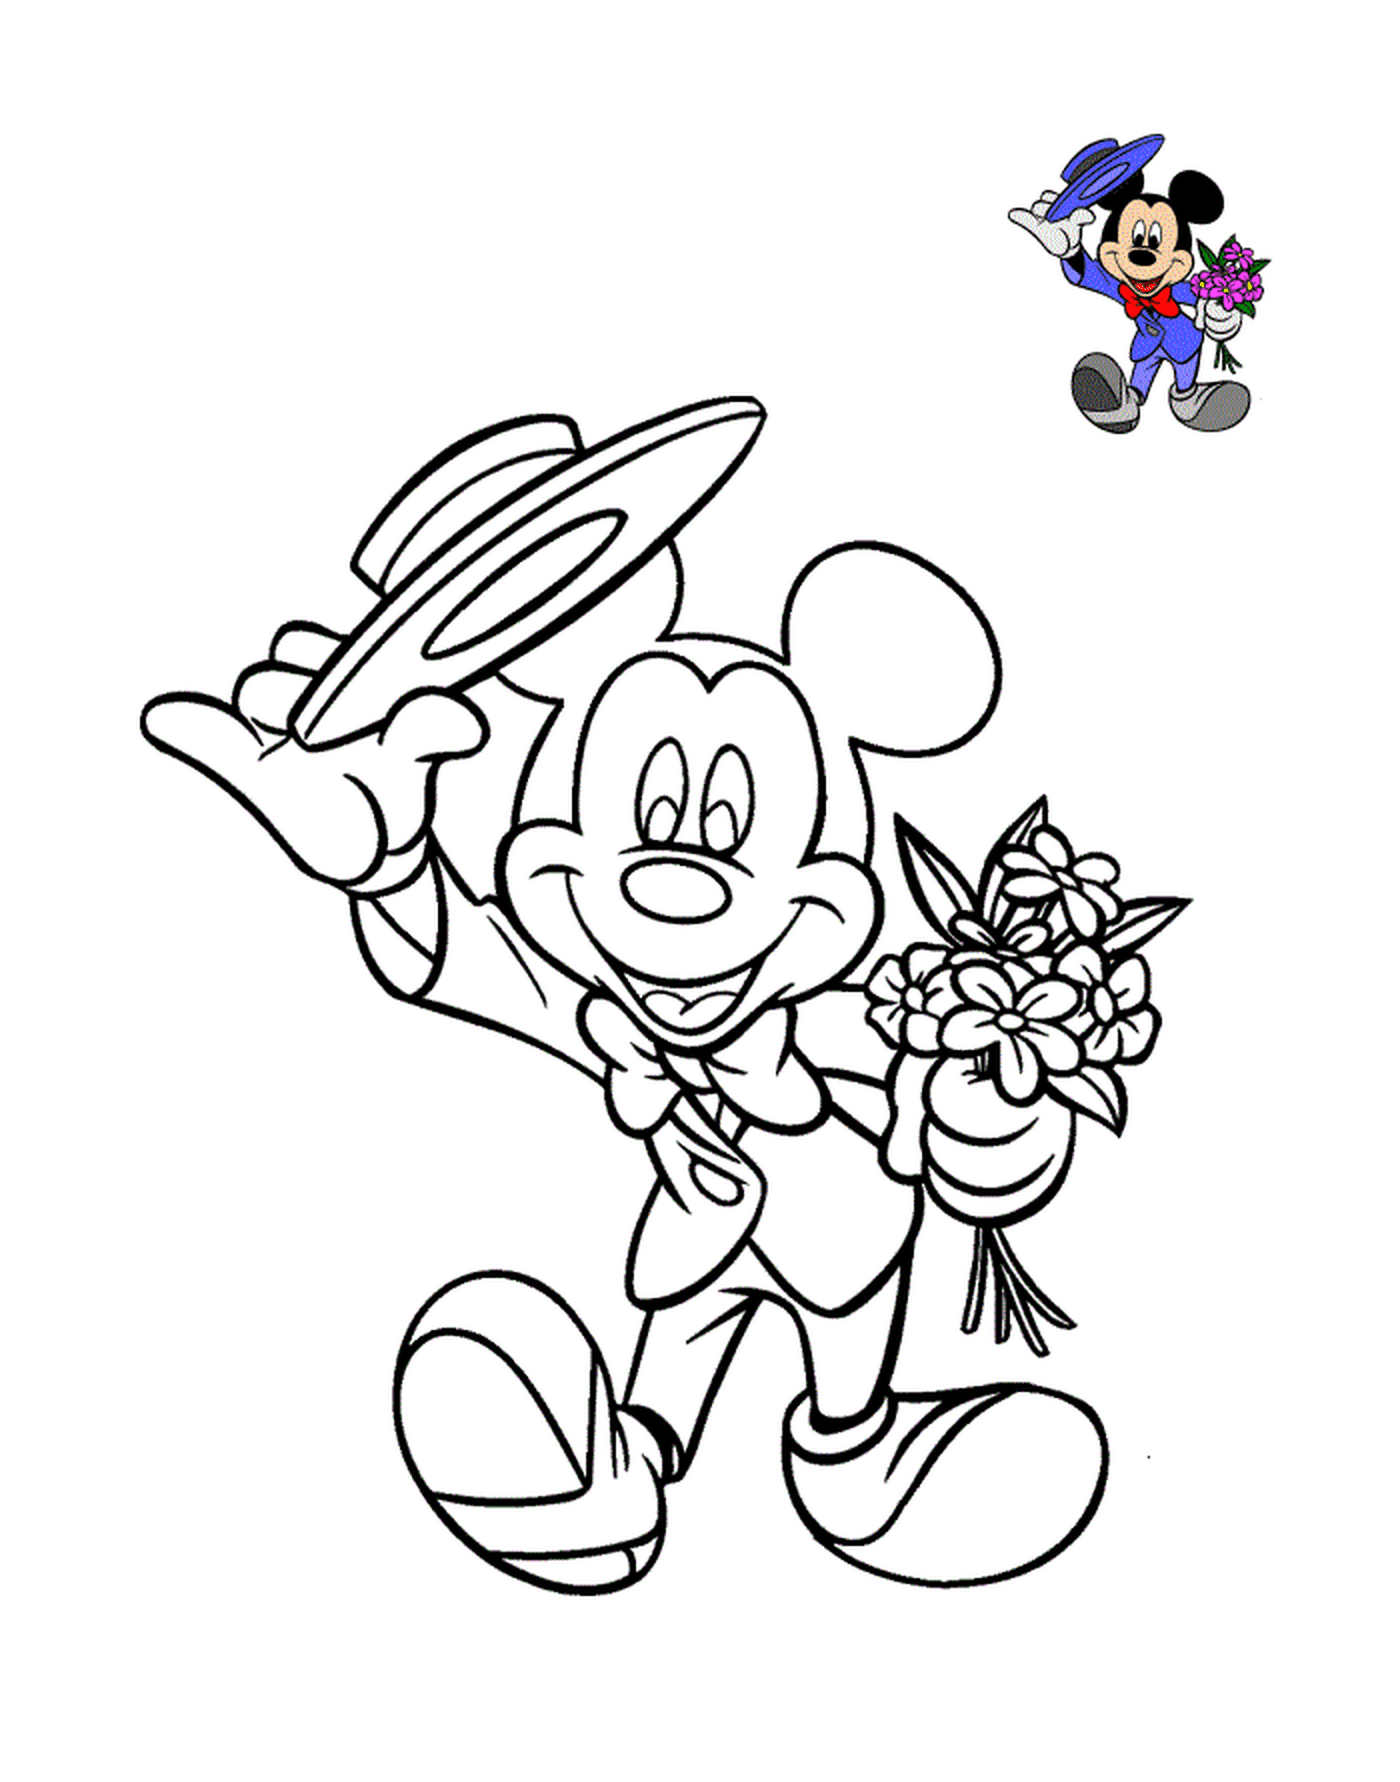  Adorable Mickey Mouse with costume and flowers 